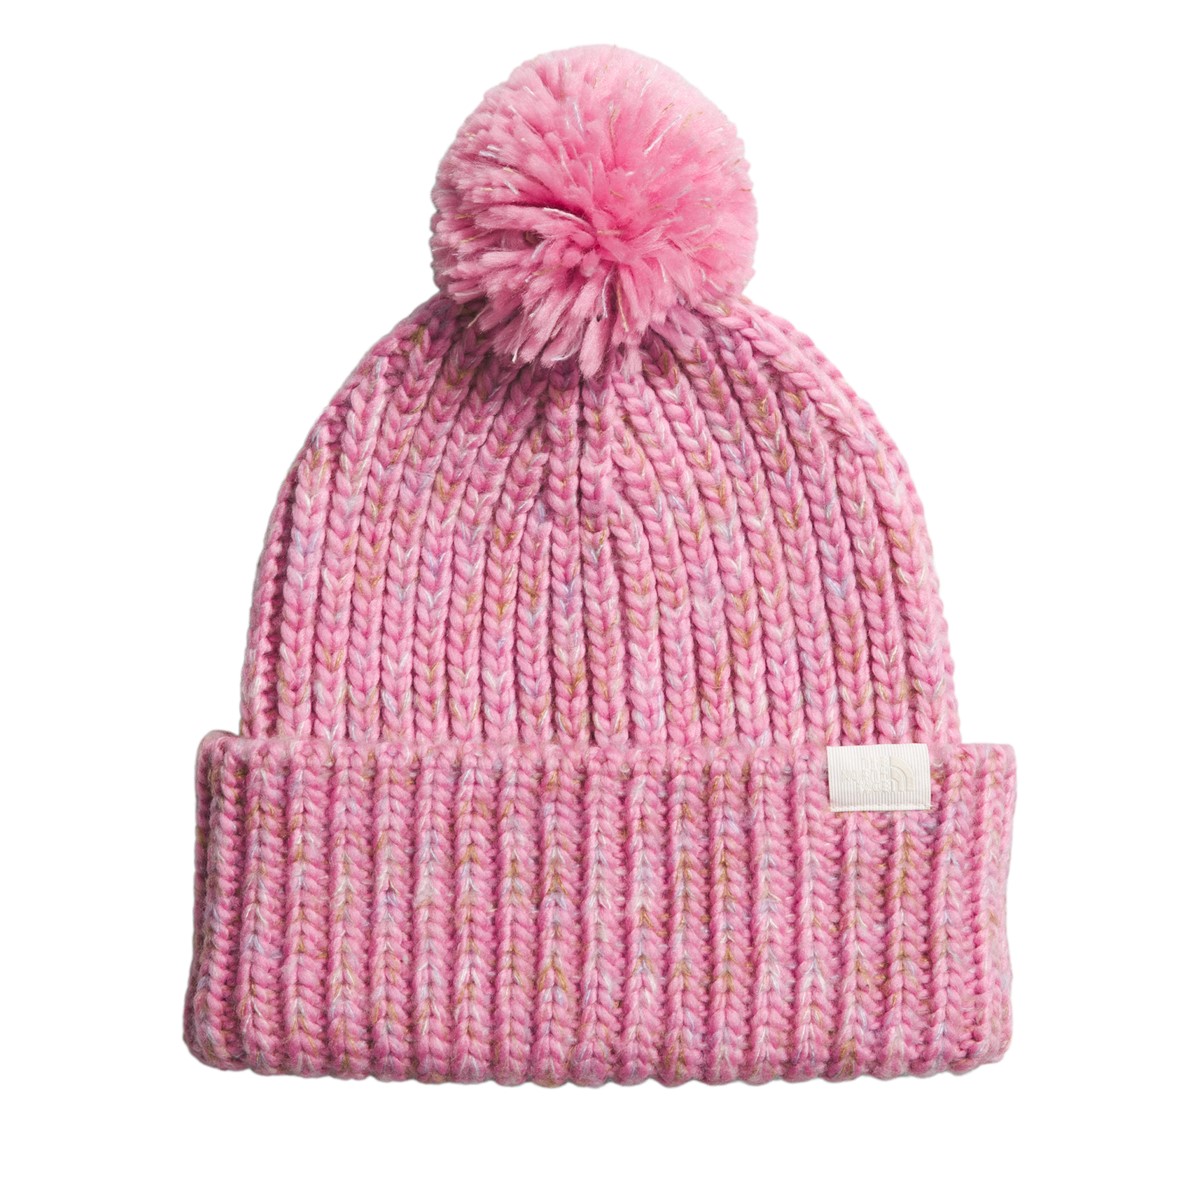 Cozy Chunky Beanie in Pink